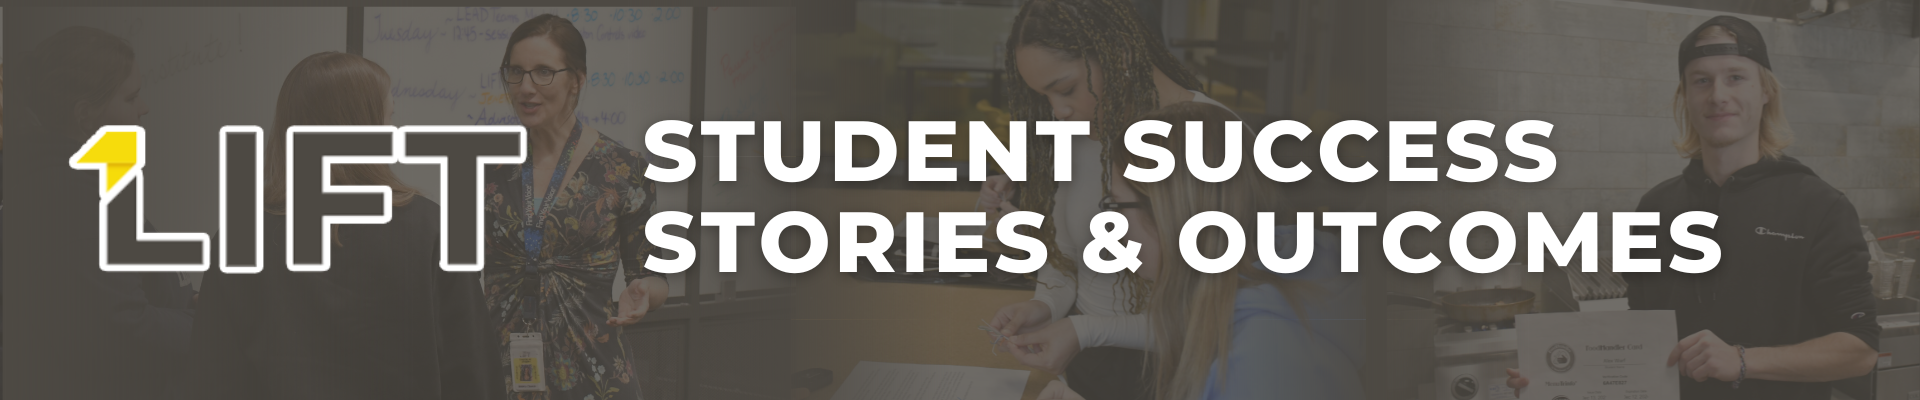 Student Success Stories & Outcomes